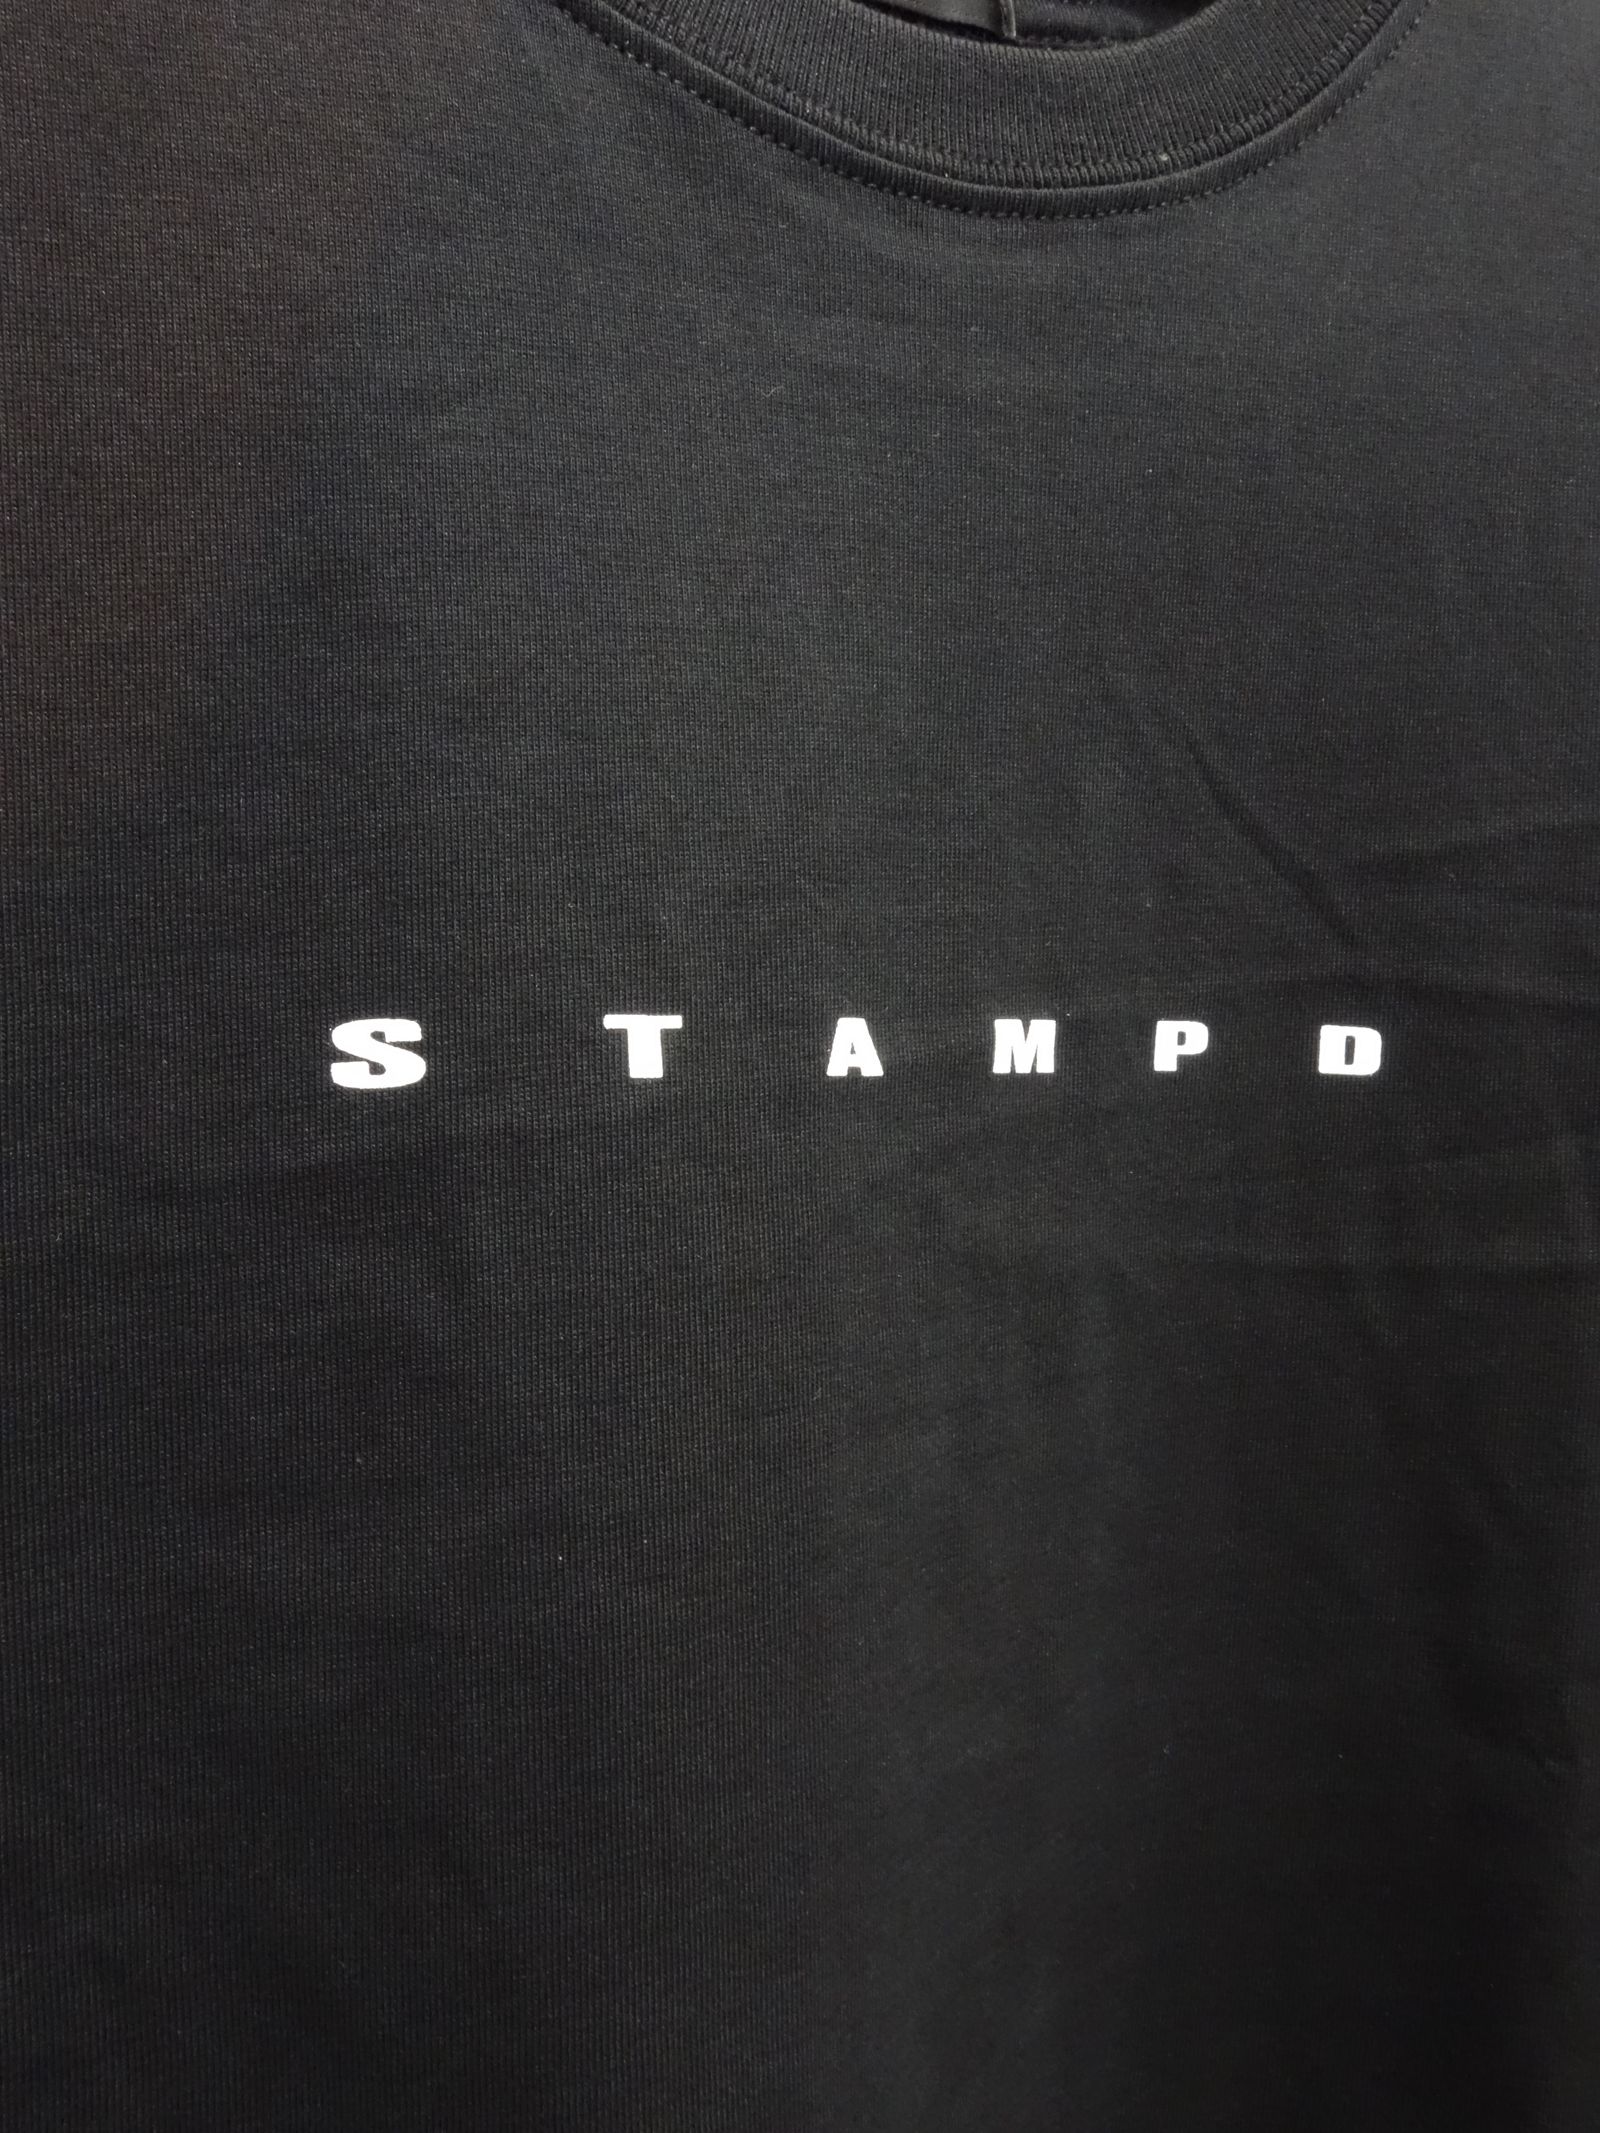 STAMPD - STAMPD MICRO STRIKE PERFECT TEE / SLA-M2829TE / マイクロ